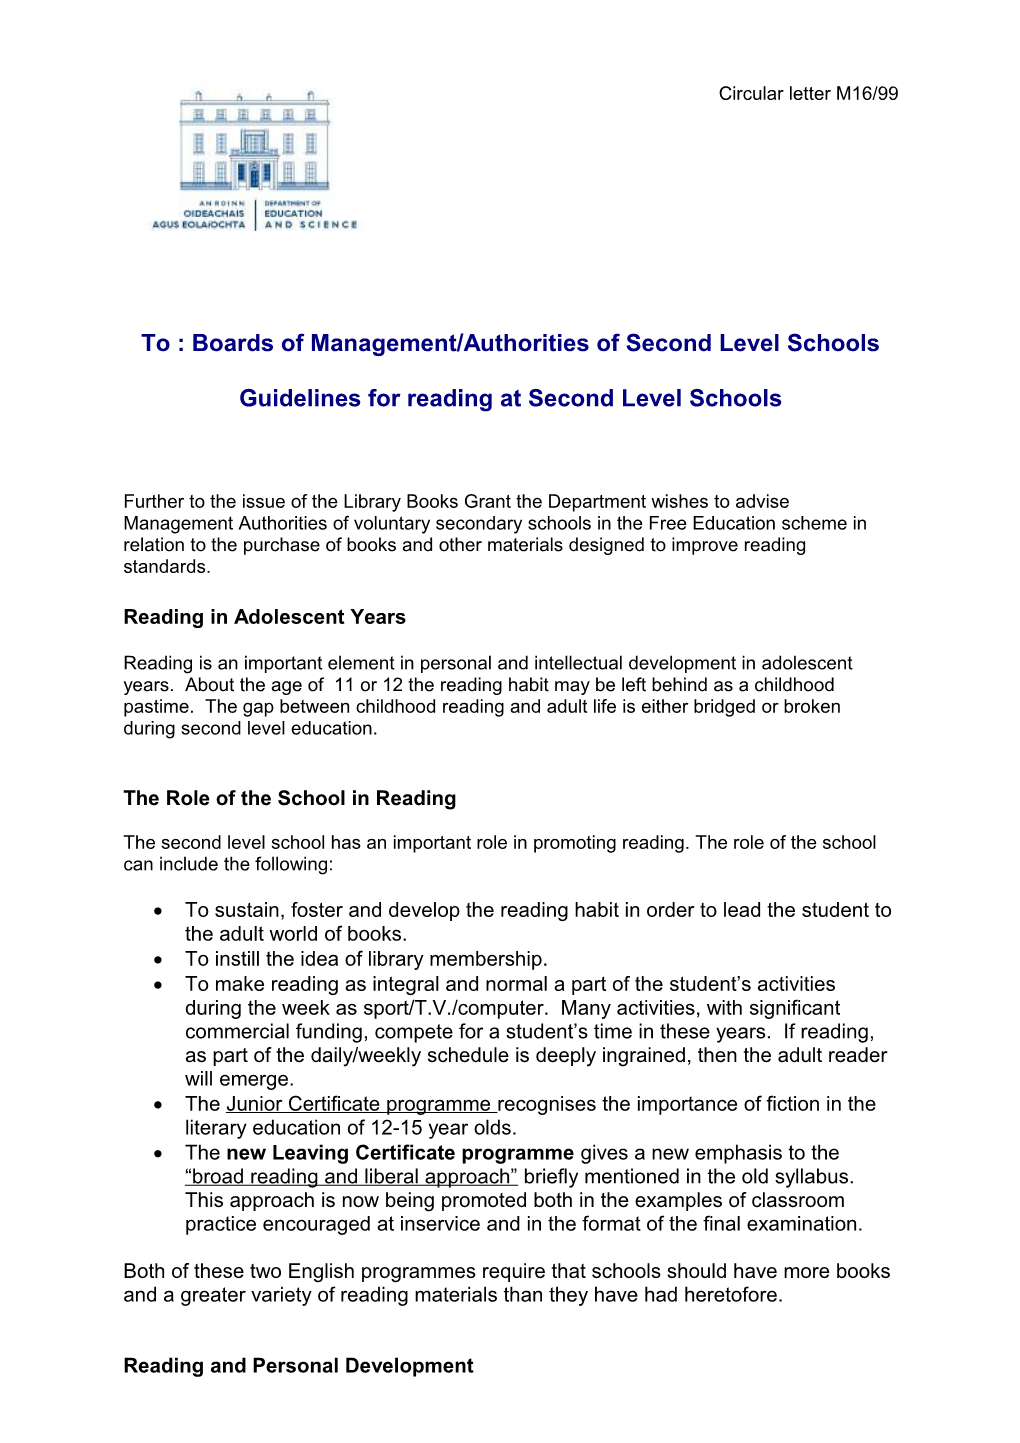 Circular M16/99 Guidelines for Reading at Second Level Schools (File Word Format 47KB)